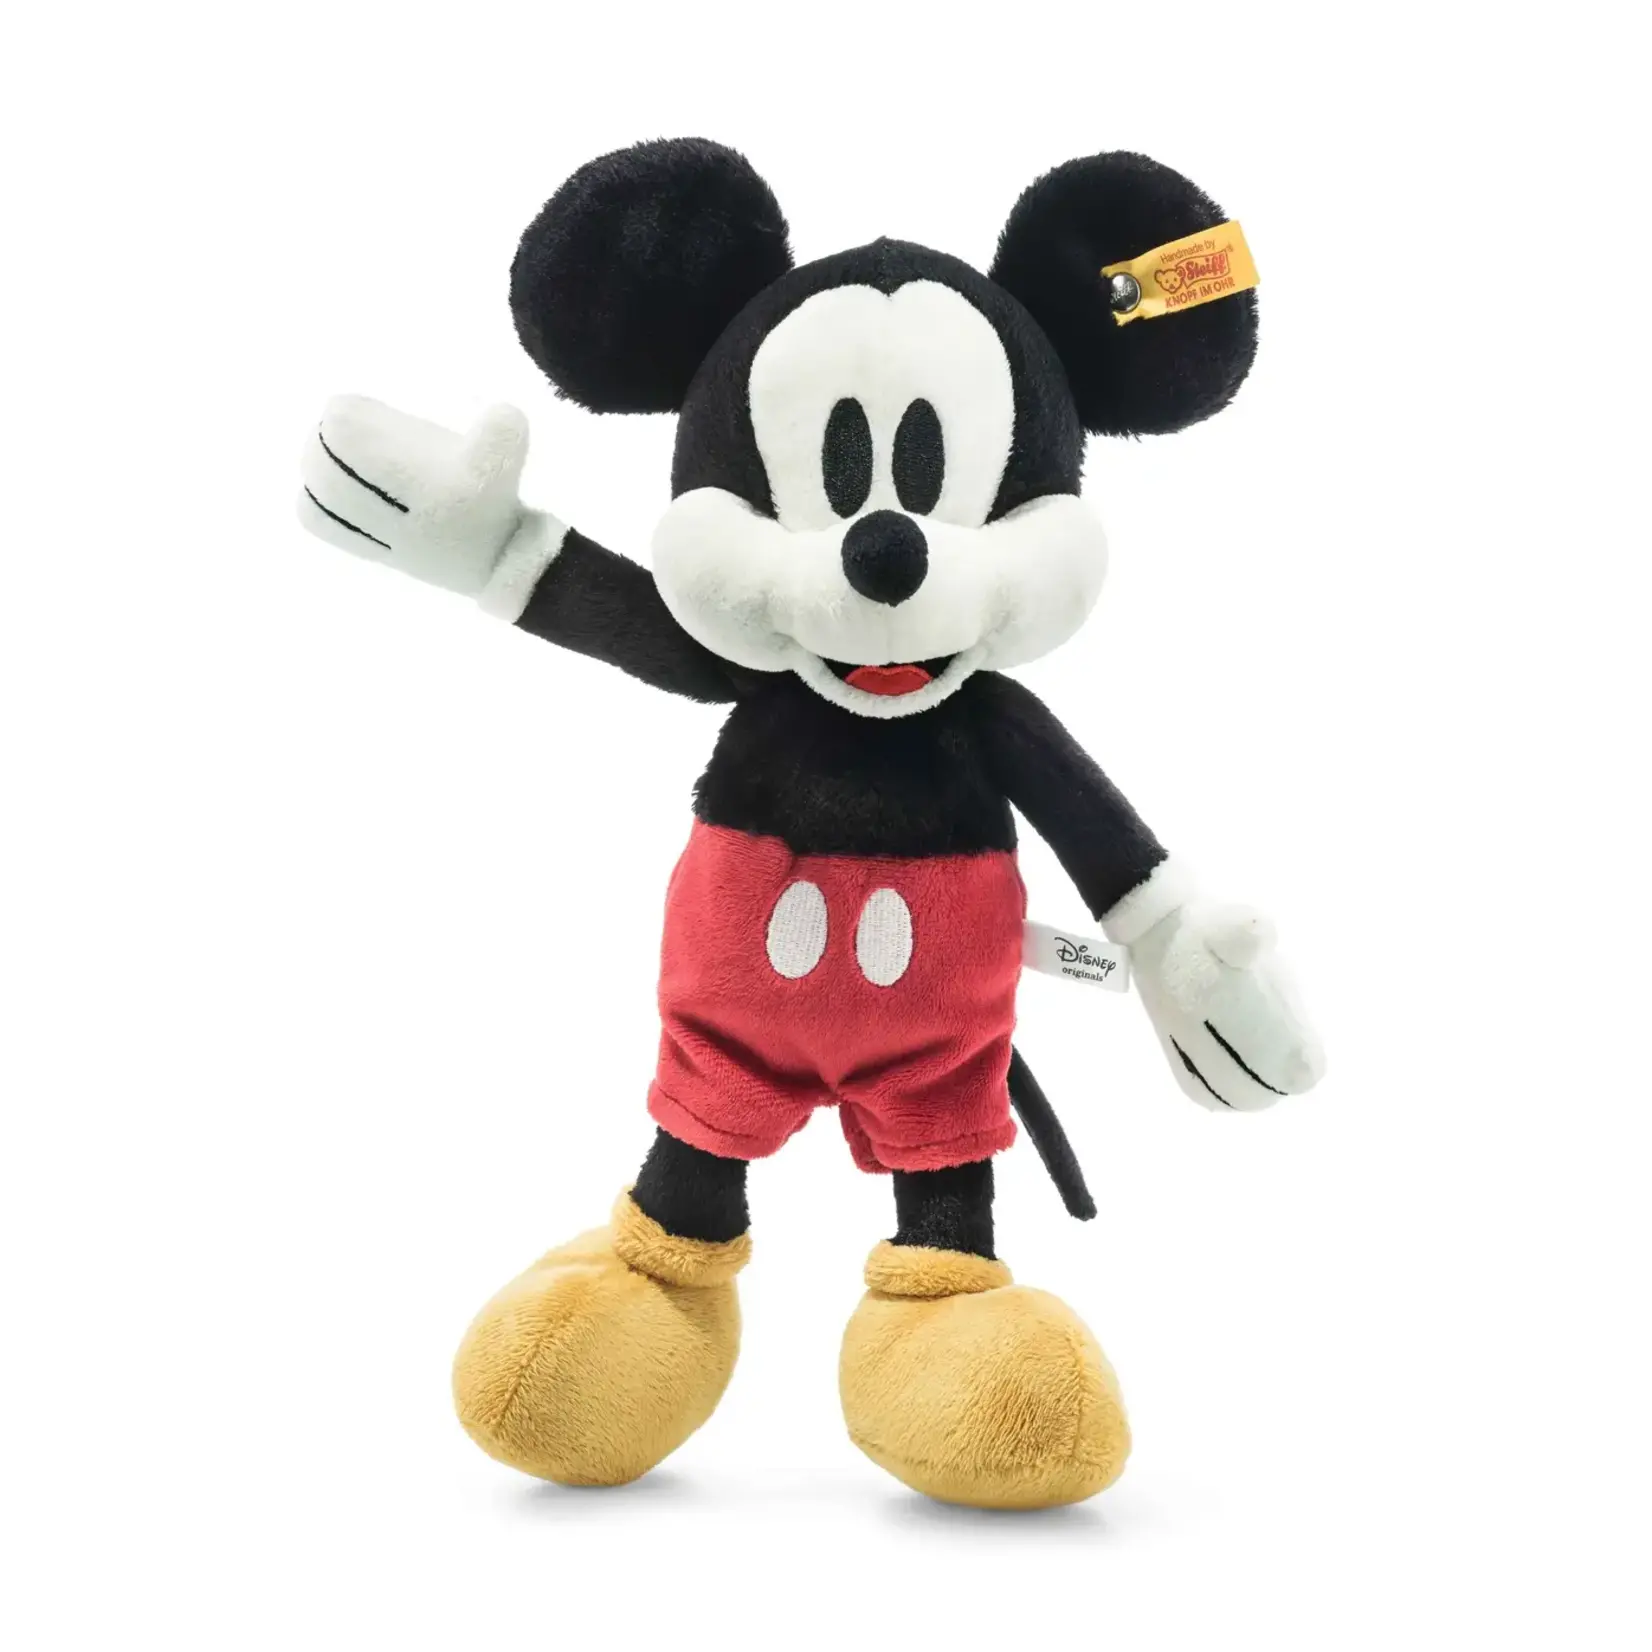 Steiff Disney's Mickey Mouse Stuffed Plush Toy, 12 Inches